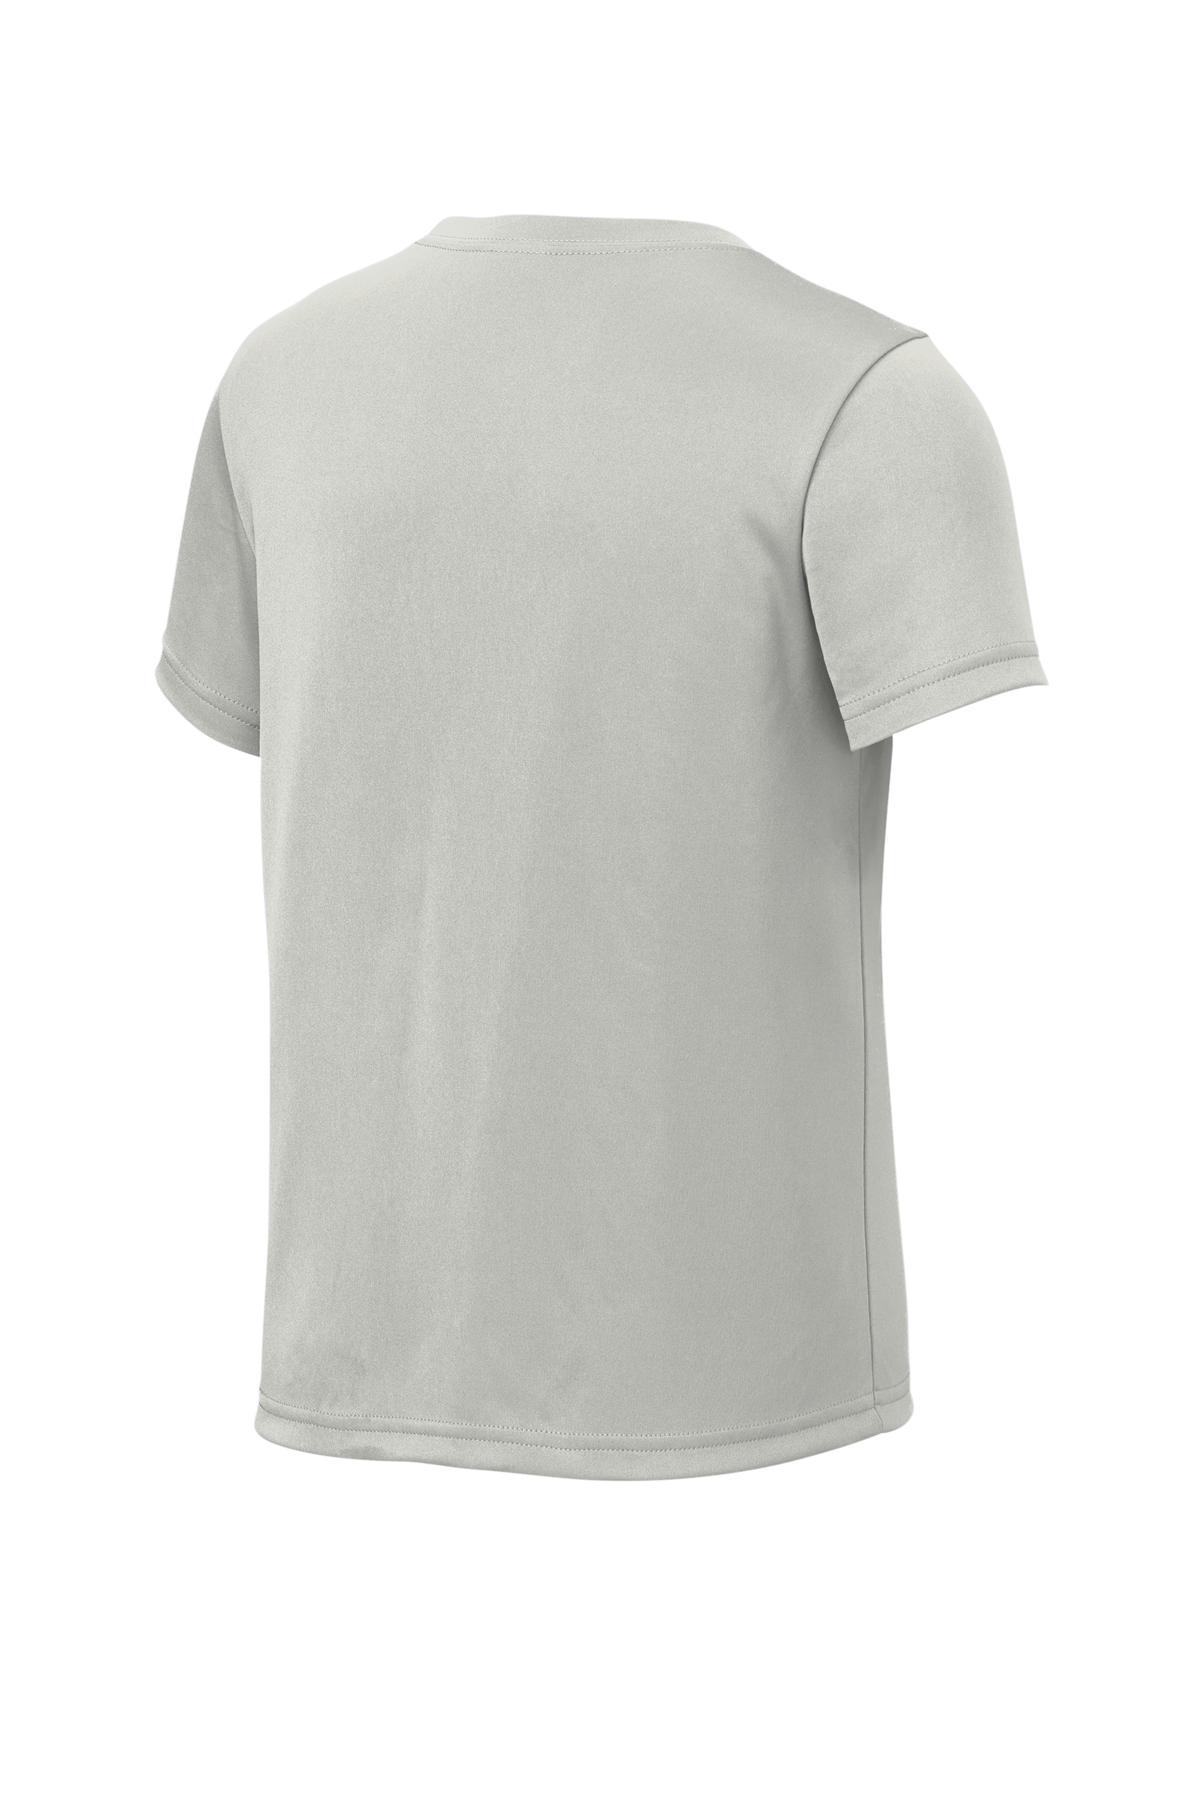 Sport-Tek Youth PosiCharge Re-Compete Tee | Product | SanMar